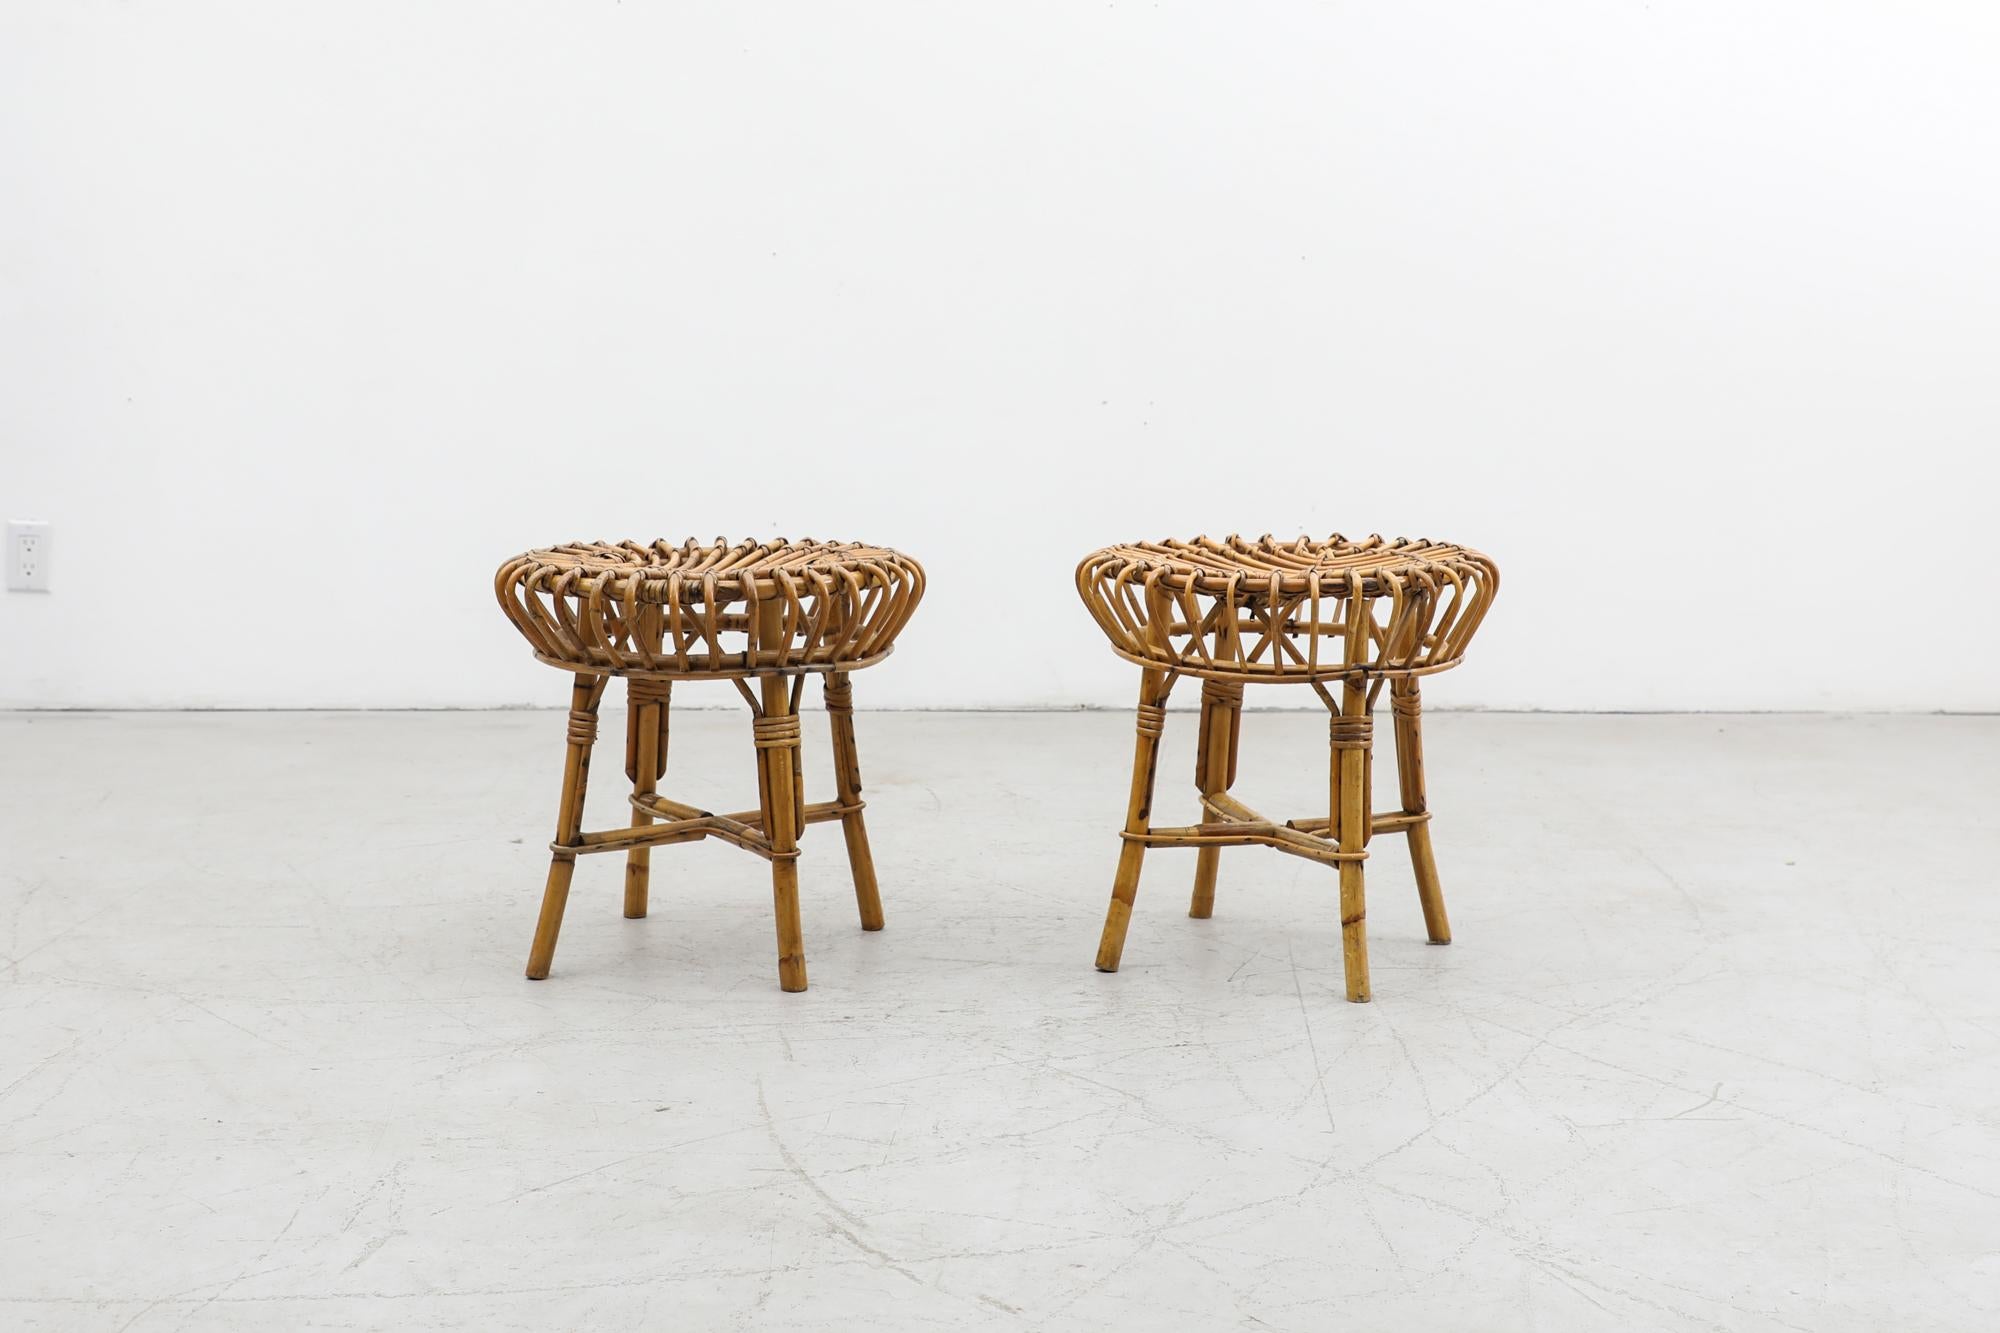 Pair of Mid-Century Bamboo Stools by Italian Mid-Century master Franco Albini, the visionary mind behind many of Cassina's most acclaimed furniture masterpieces. Hand woven and in original condition with some visible wear, consistent with their age